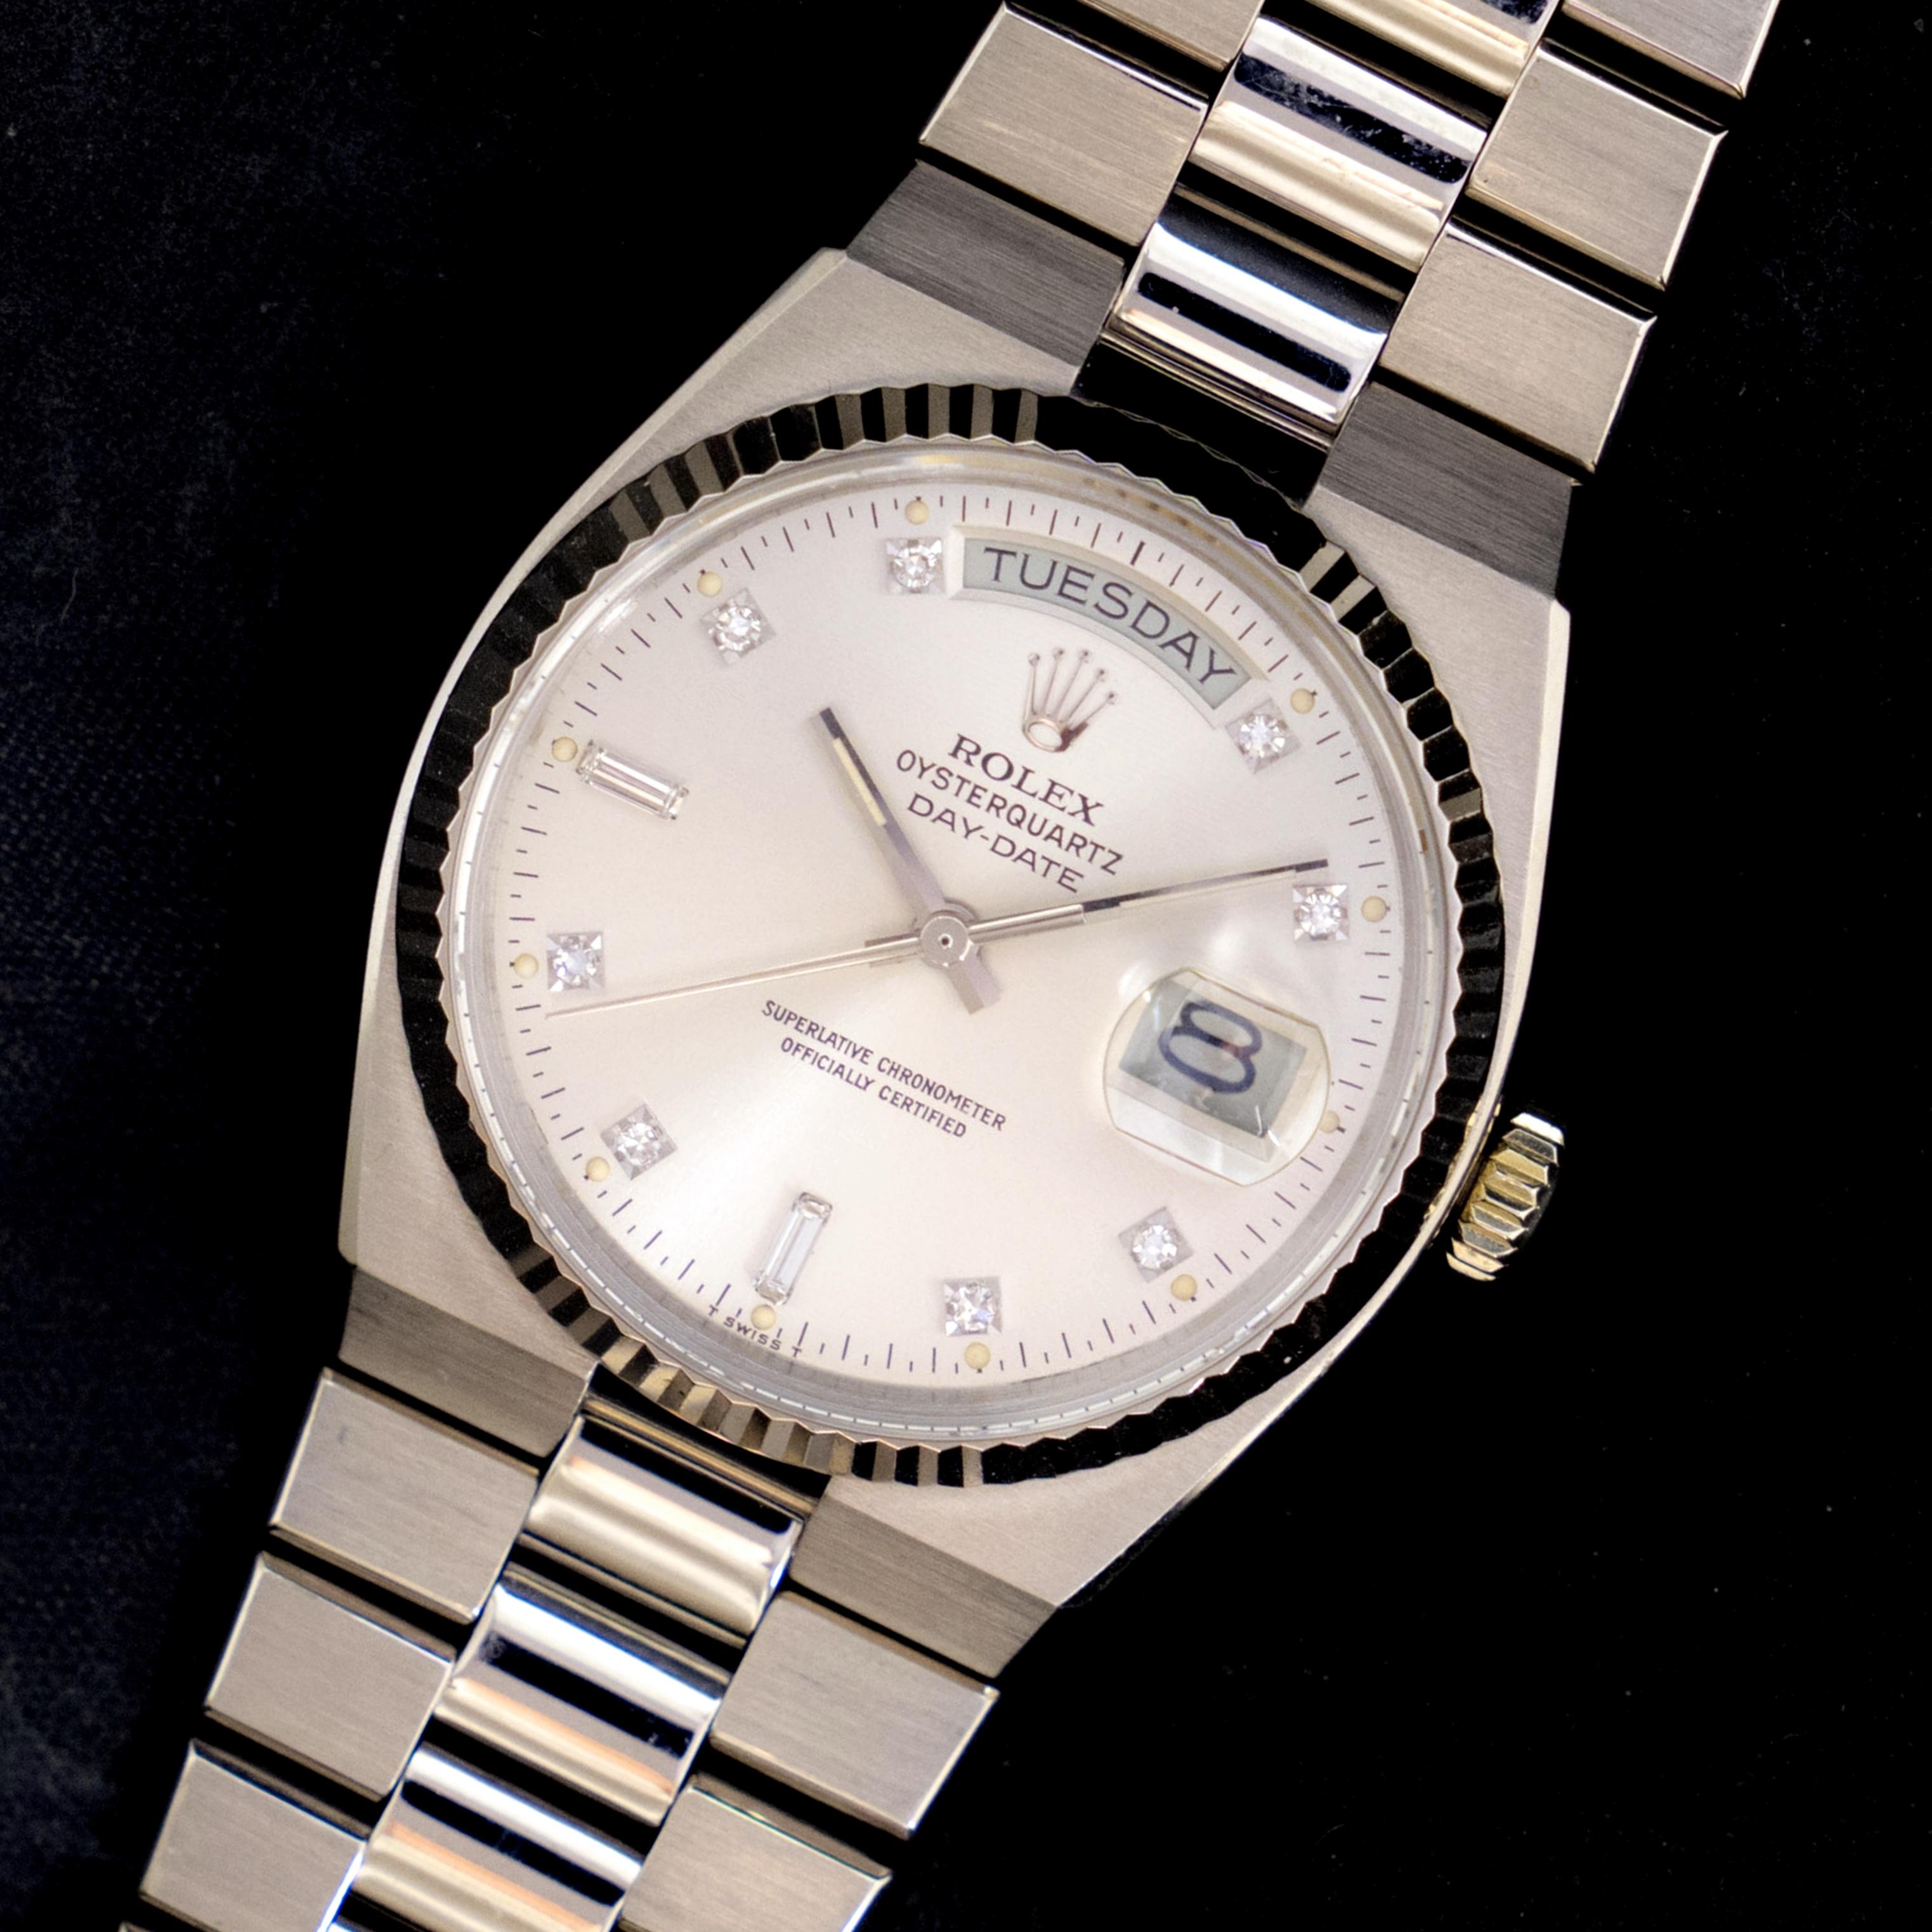 Brand: Vintage Rolex
Model: 19019
Year: 1979
Serial number: 62xxxxx
Reference: C03963

Case: 18K white gold 36mm without crown; Show sign of wear with slight polish from previous; inner case back stamped 19000

Dial: Excellent Condition Silver Dial